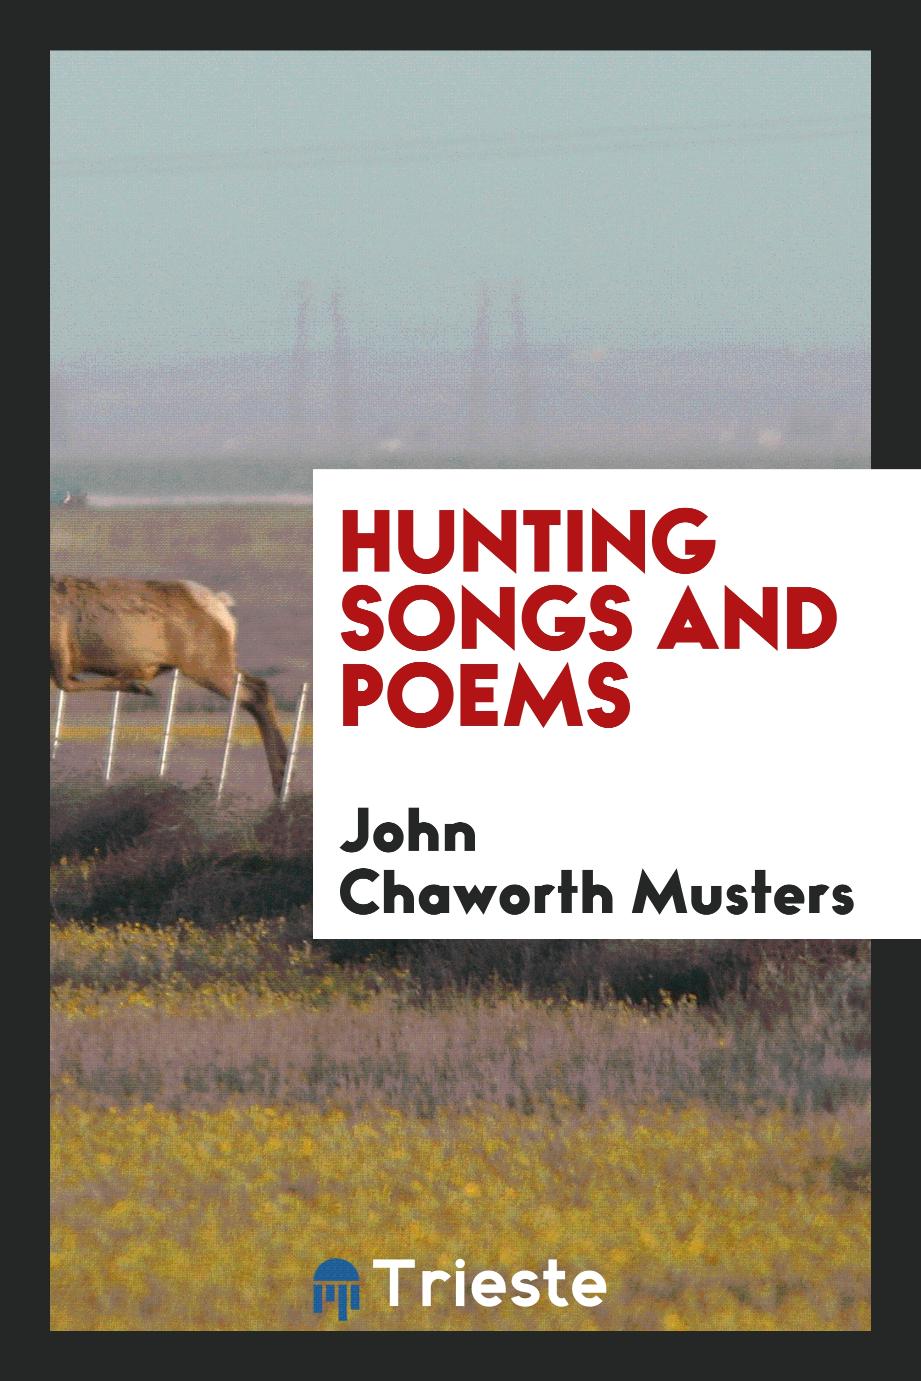 Hunting songs and poems